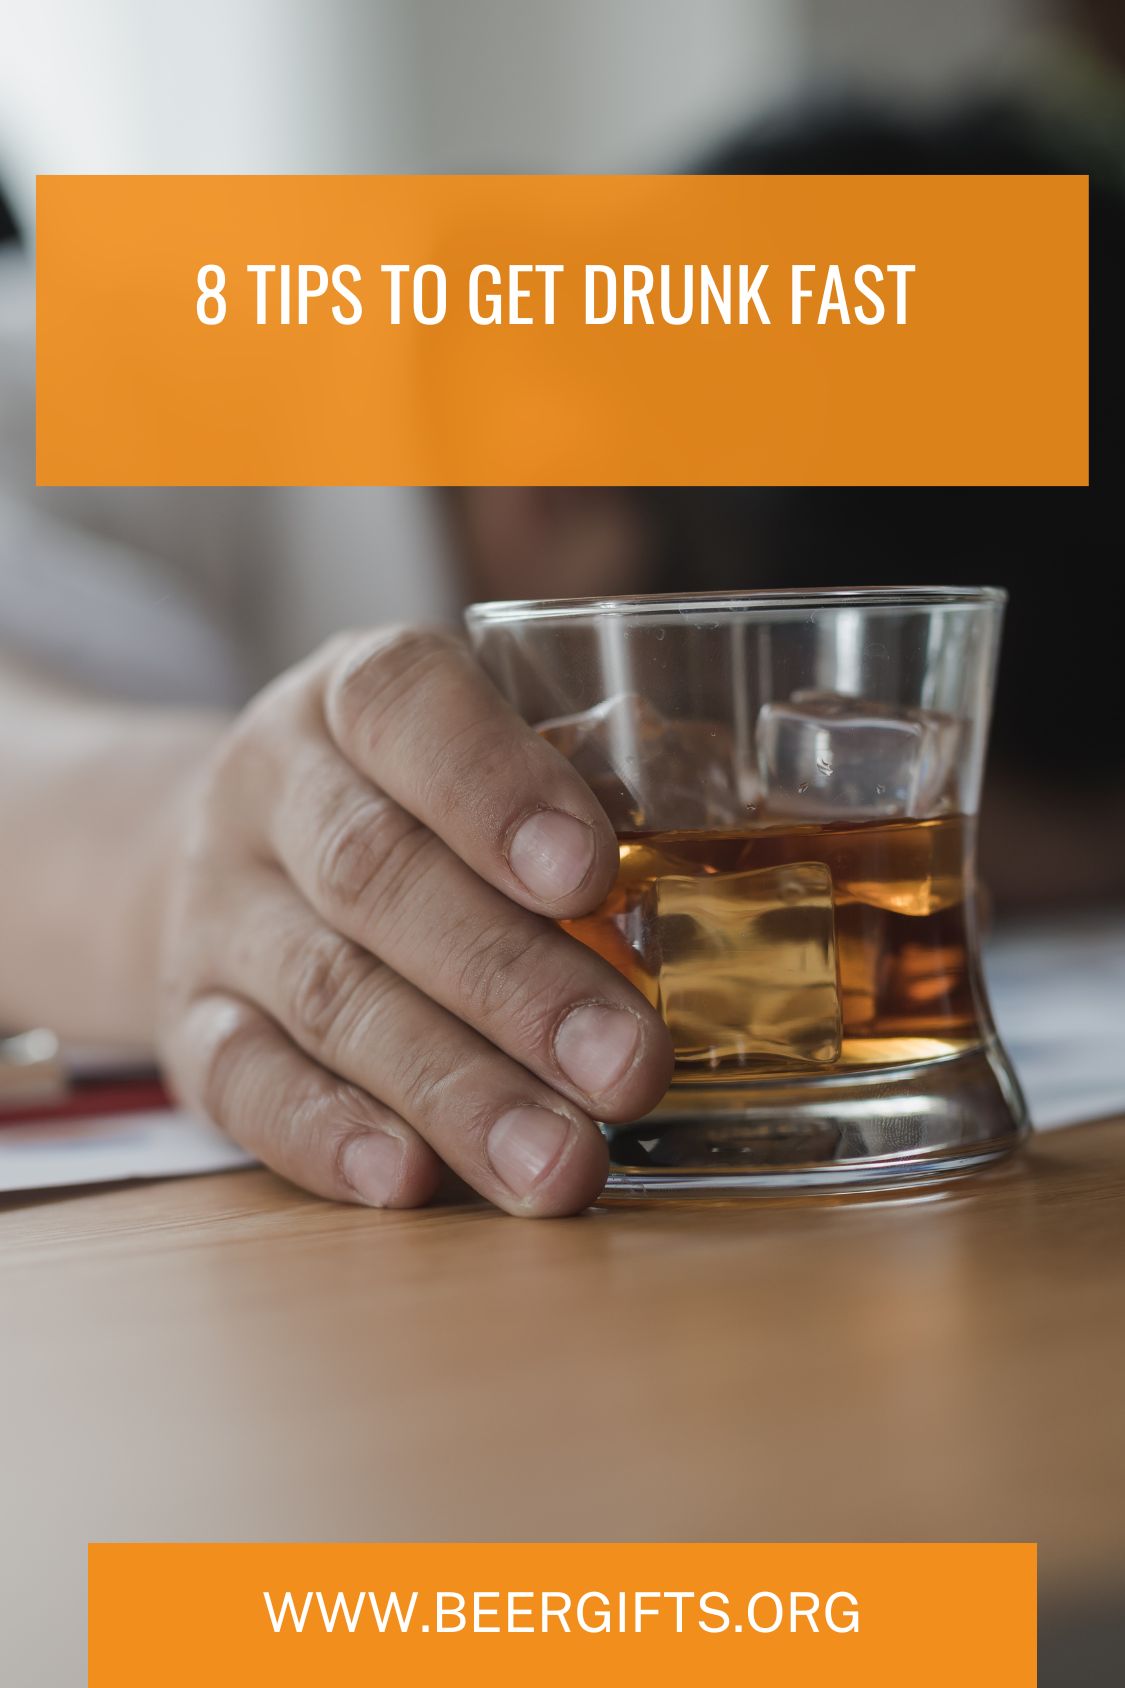 8 Tips to Get Drunk Fast